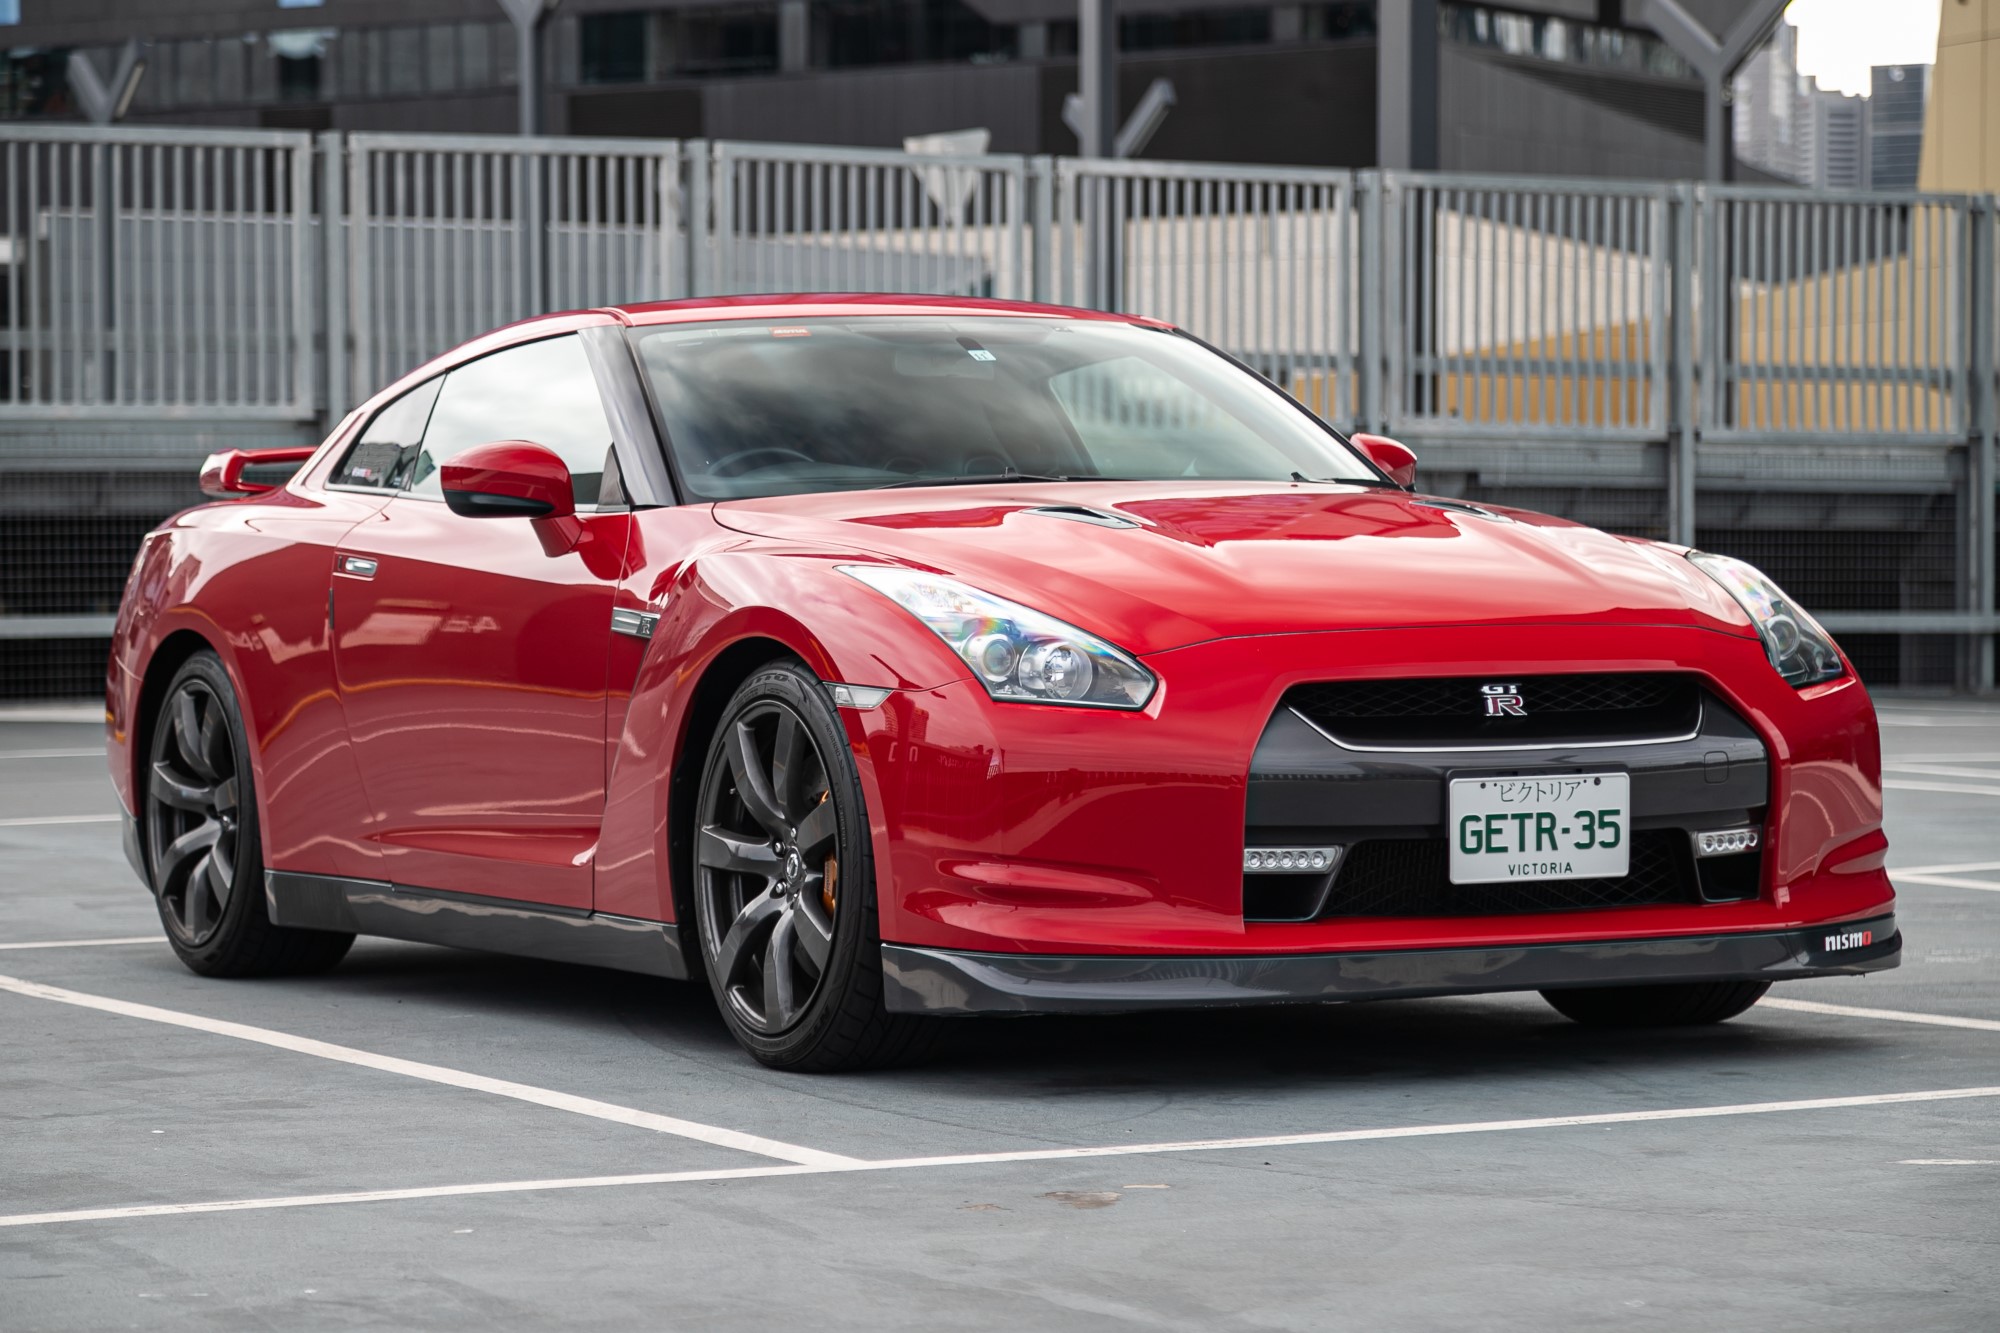 2008 NISSAN (R35) GT-R for sale by auction in Southbank, Victoria 